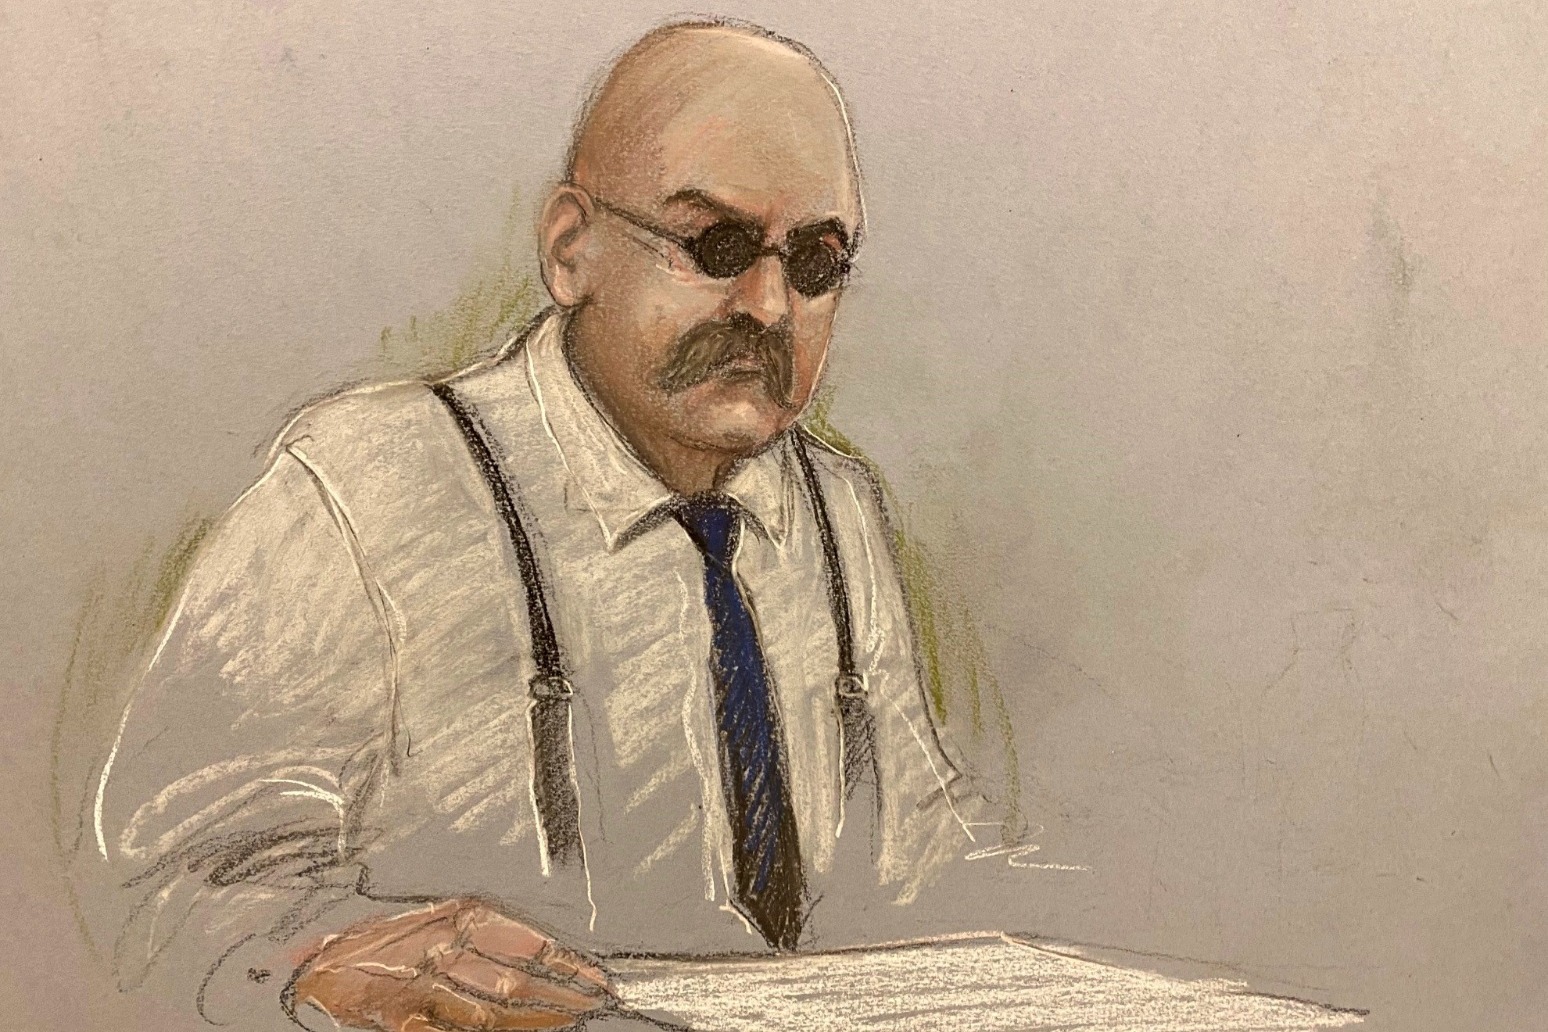 Prisoner Charles Bronson tells parole hearing he is an ‘angel’ compared with past self 